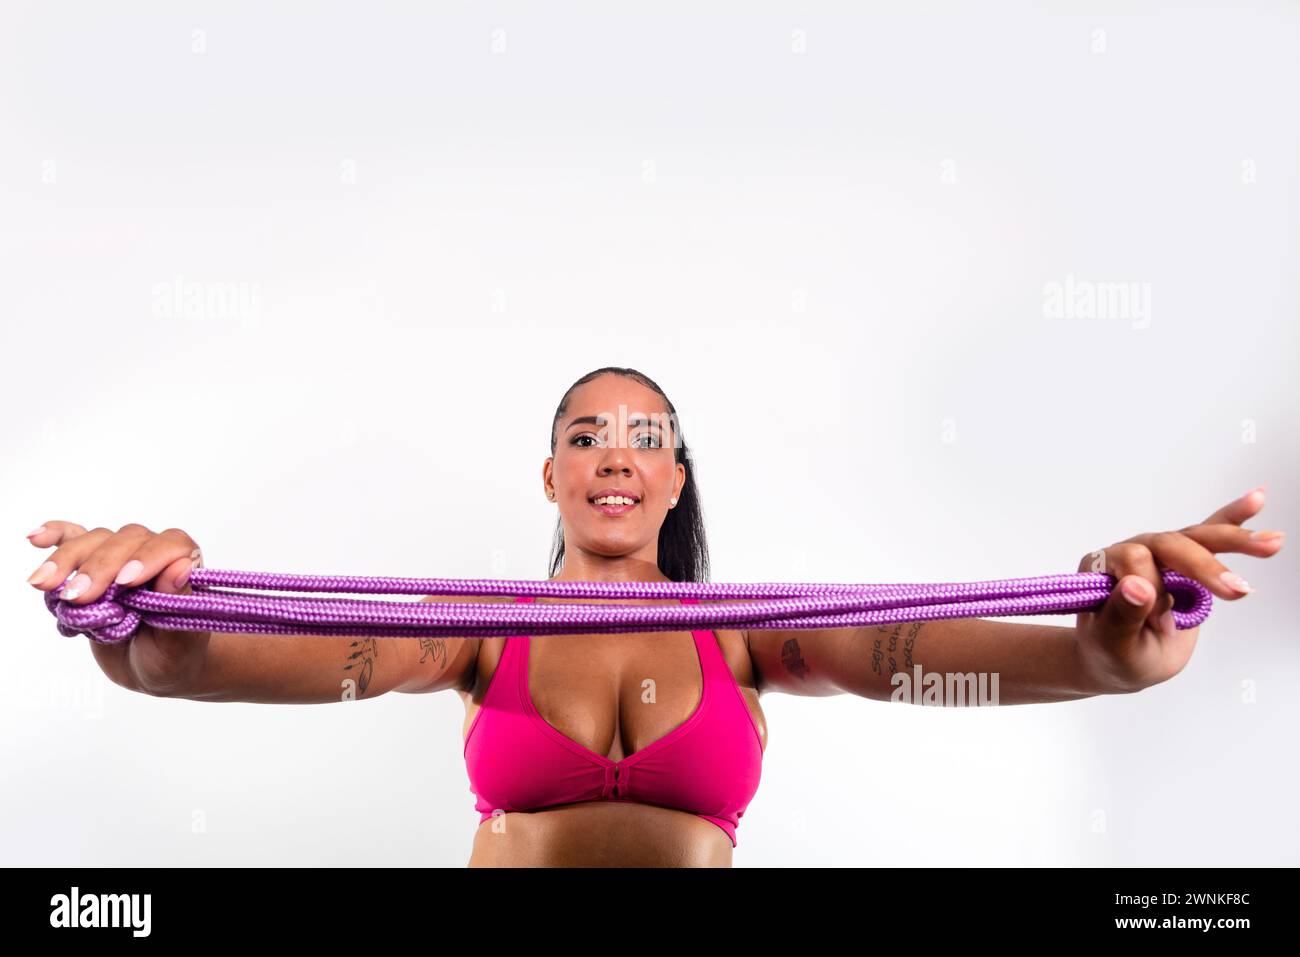 Young gymnast woman holding lilac colored rope for stretching. Against white background. Olympic athlete. Stock Photo